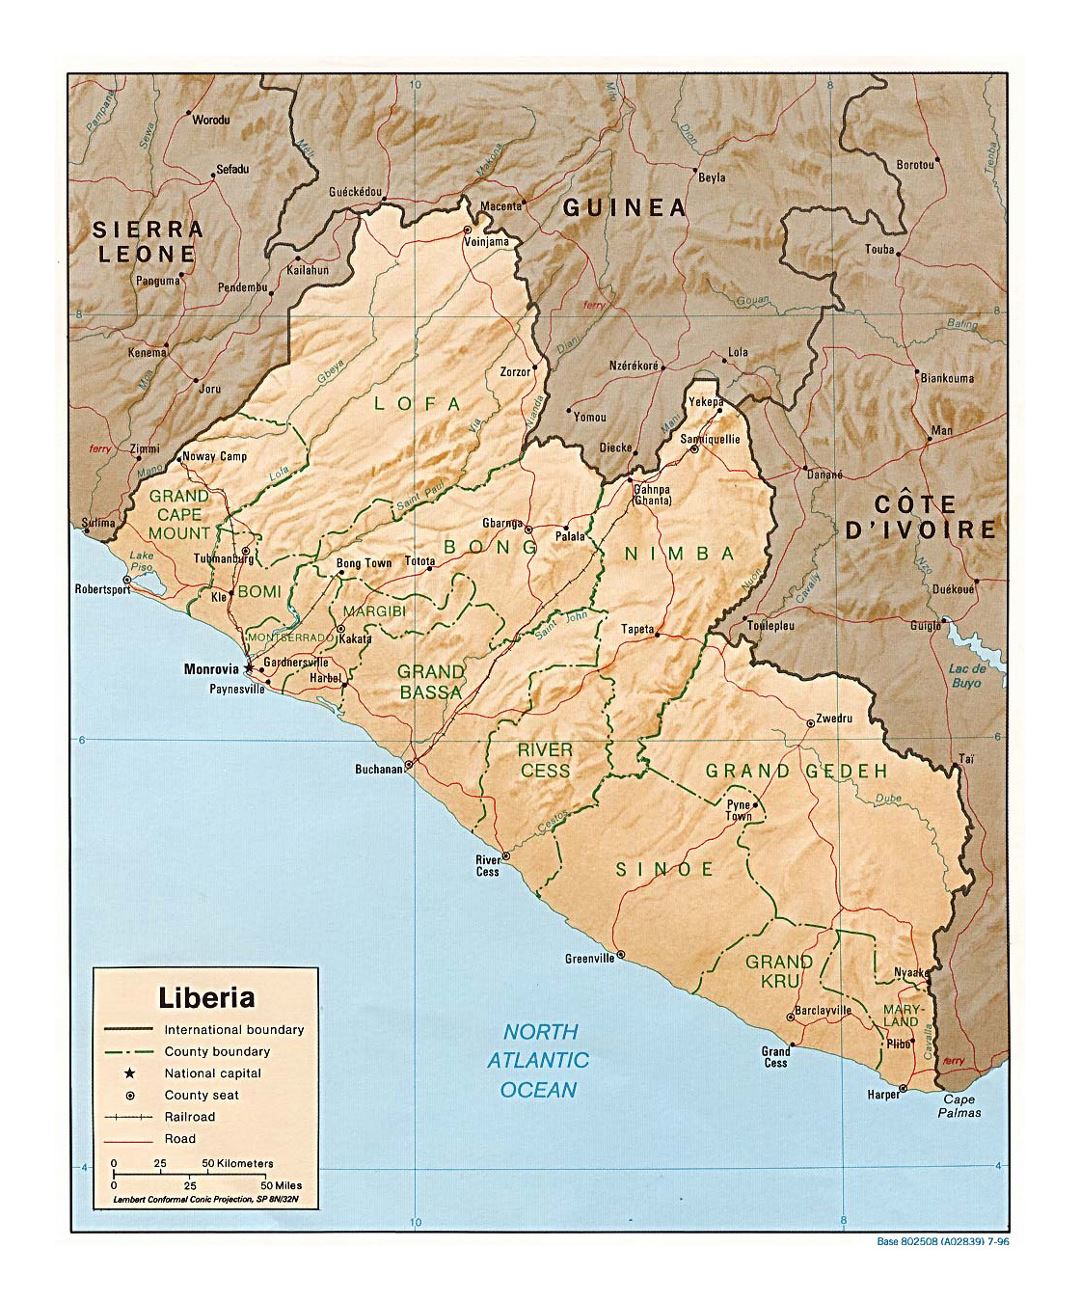 Detailed political and administrative map of Liberia with relief, roads, railroads and major cities - 1996